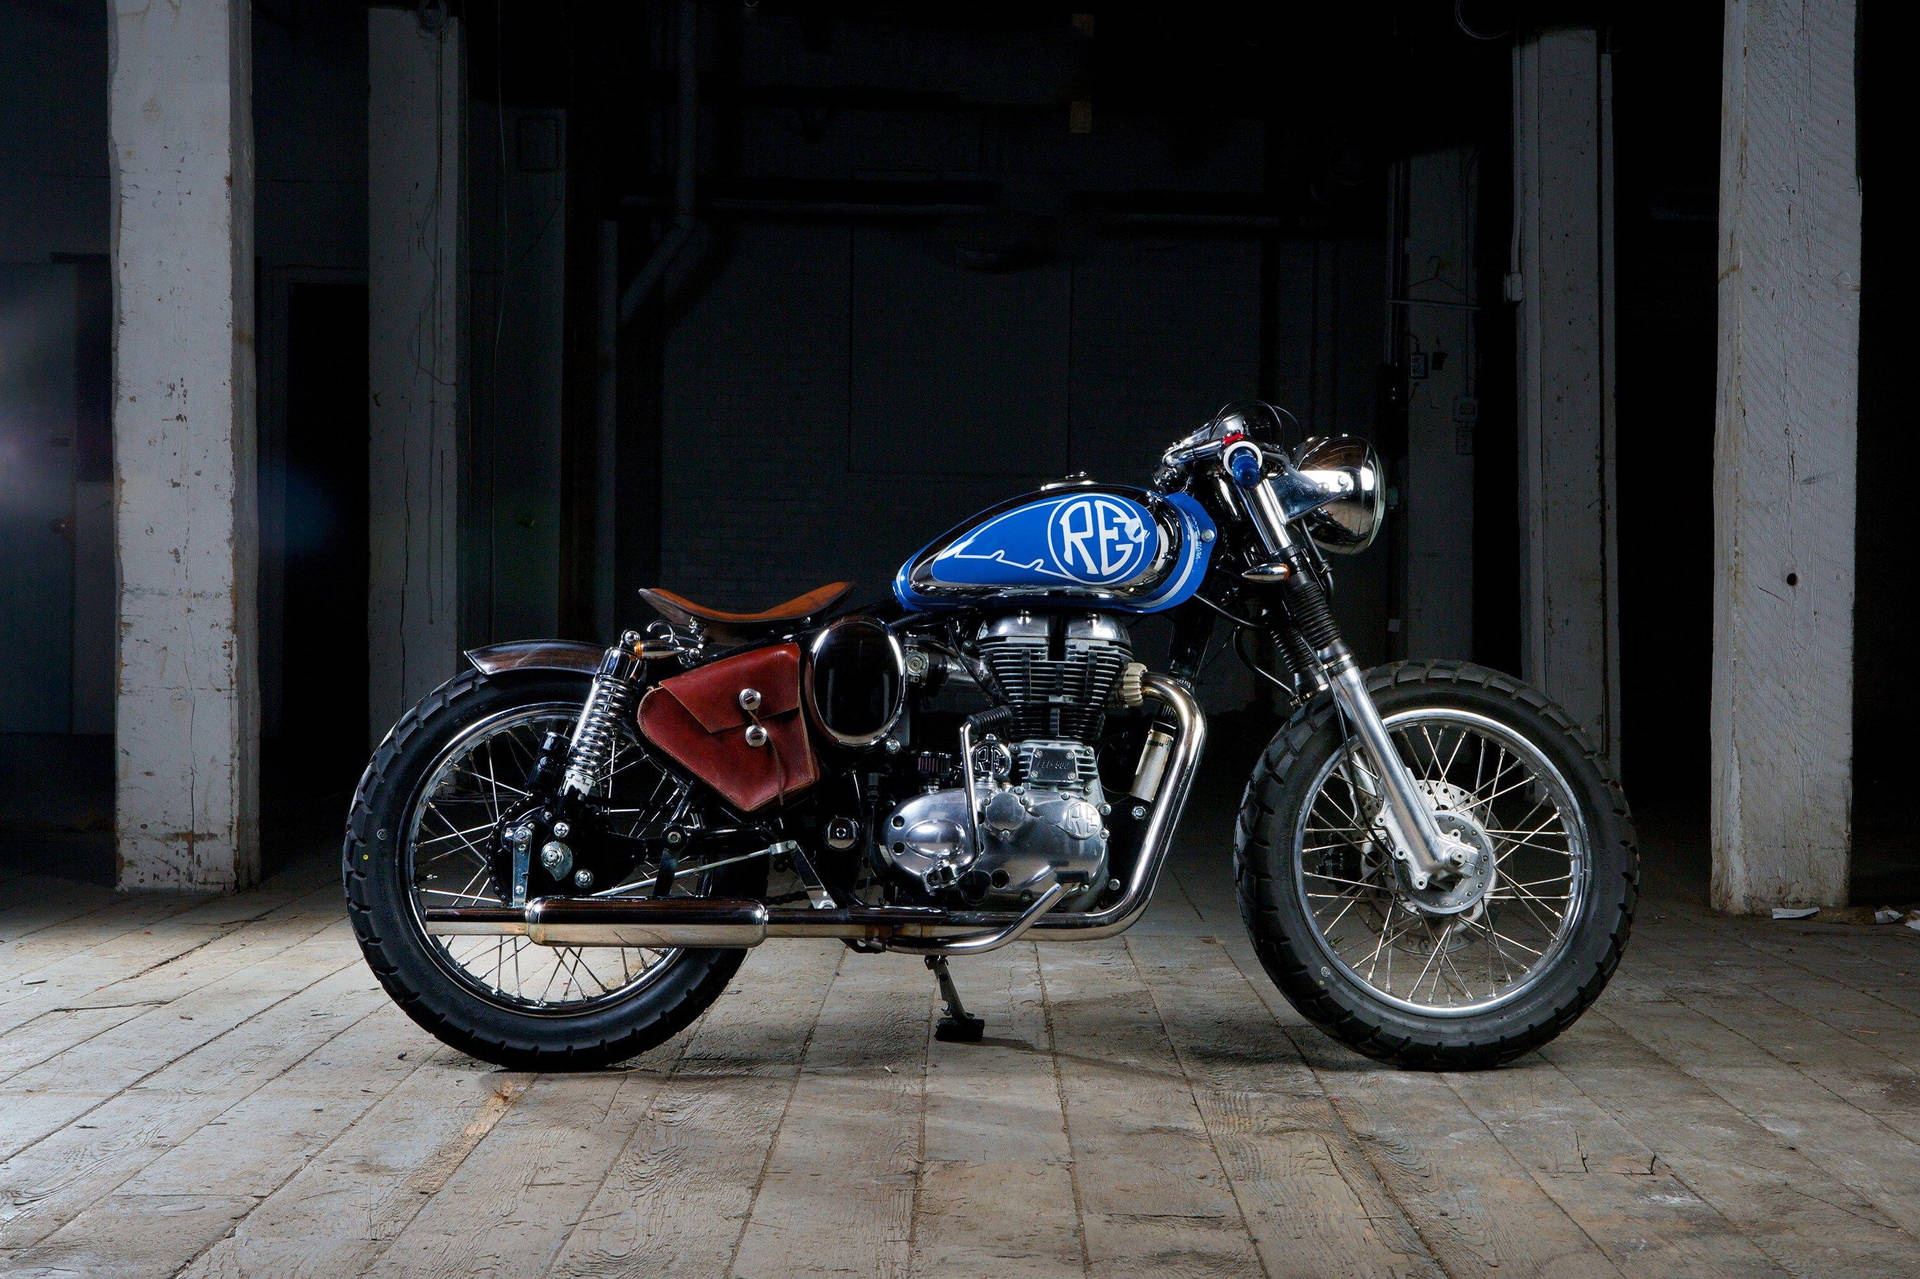 Vintage Vibes - Beachside With The Royal Enfield Hd Bobber Background